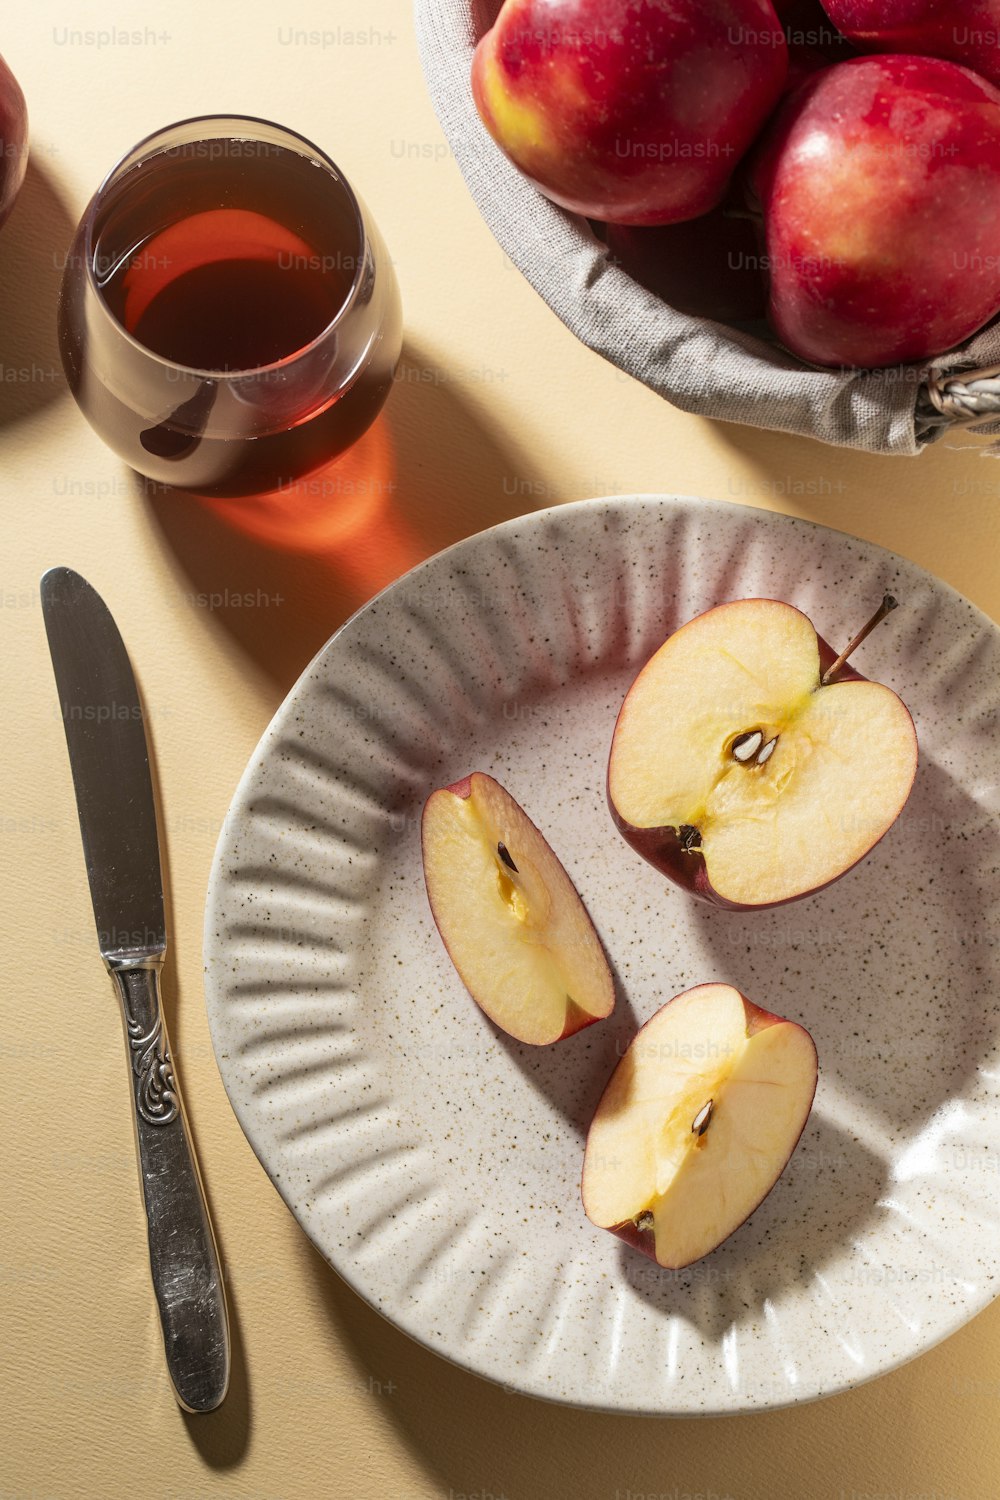 a bowl of apples and a plate of apples next to a cup of tea